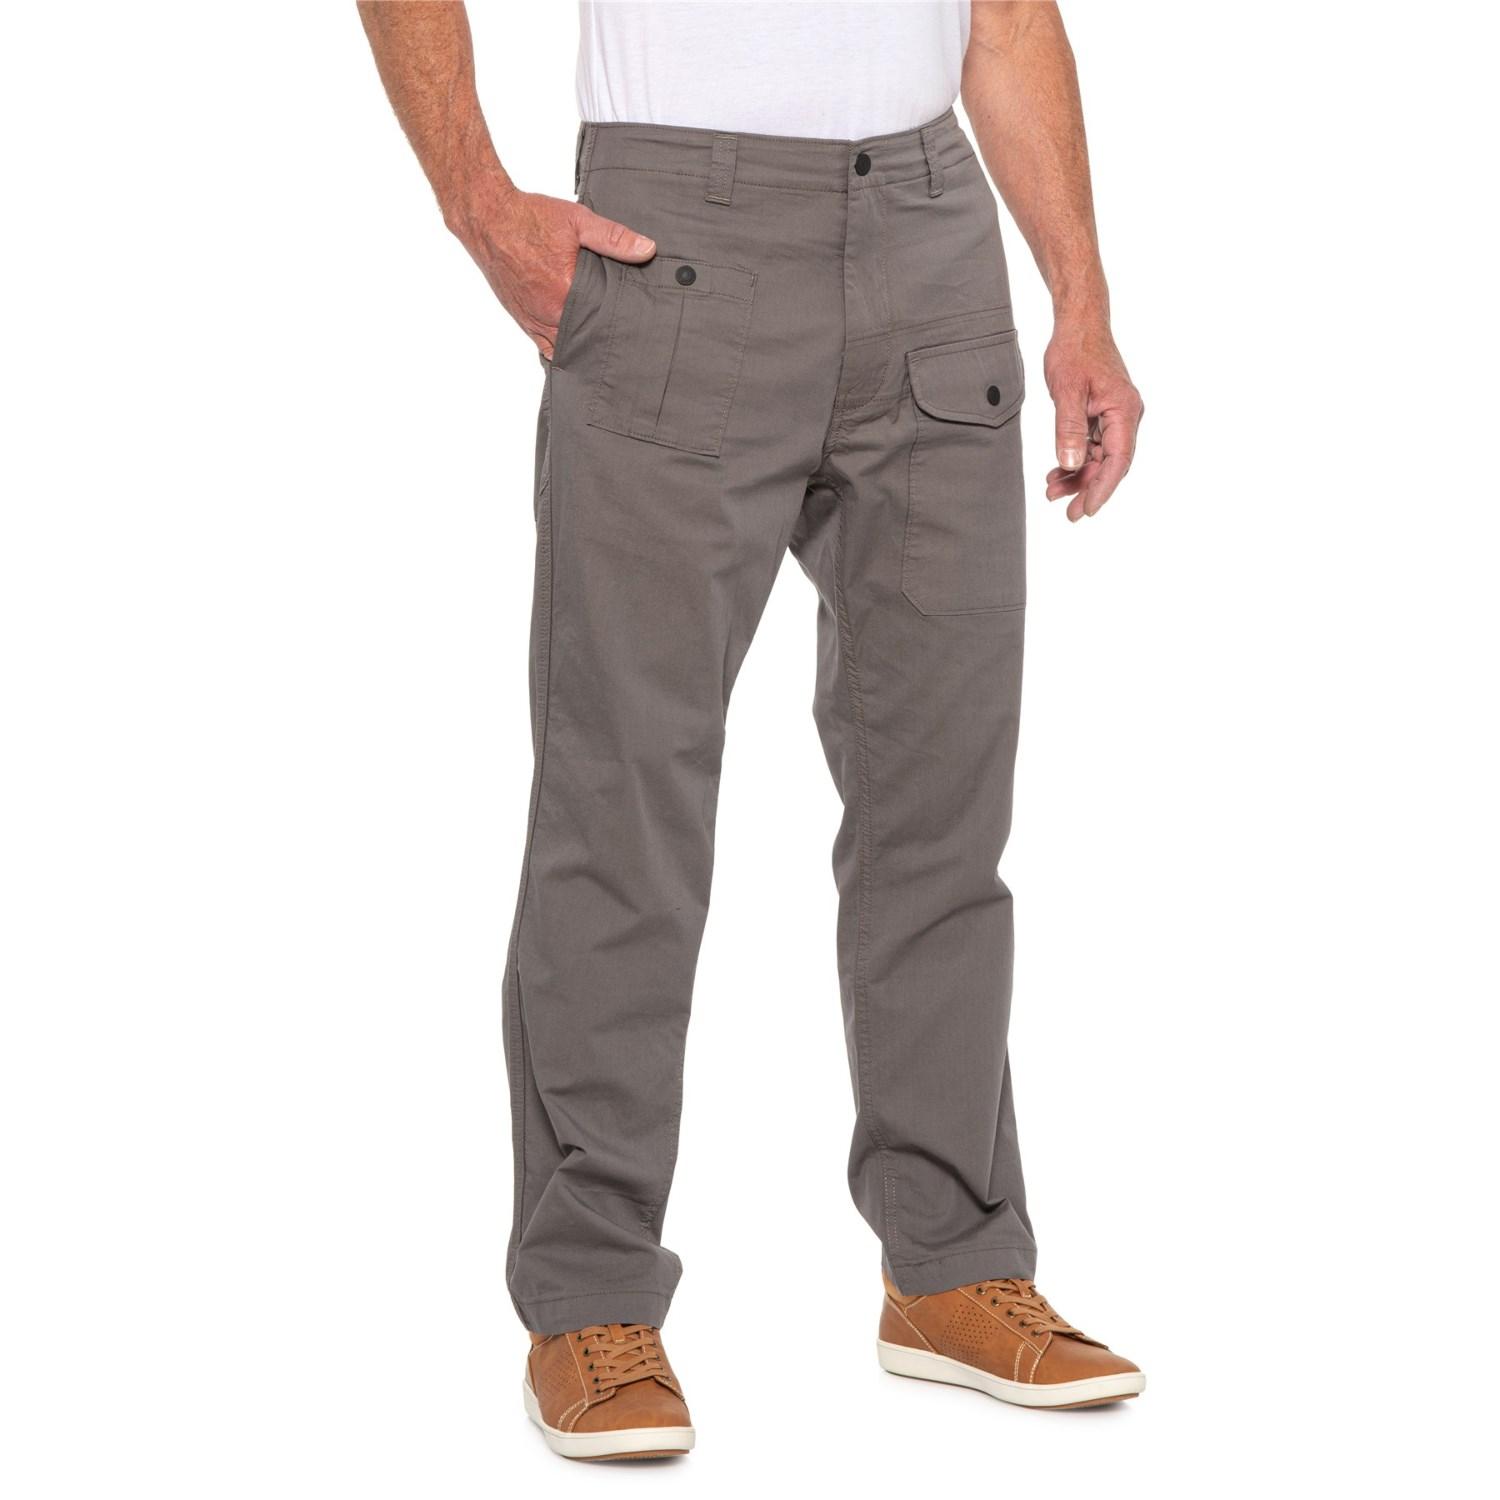 Levi's T3 Ms 541 Tac Cargo Pants in Gray for Men - Lyst